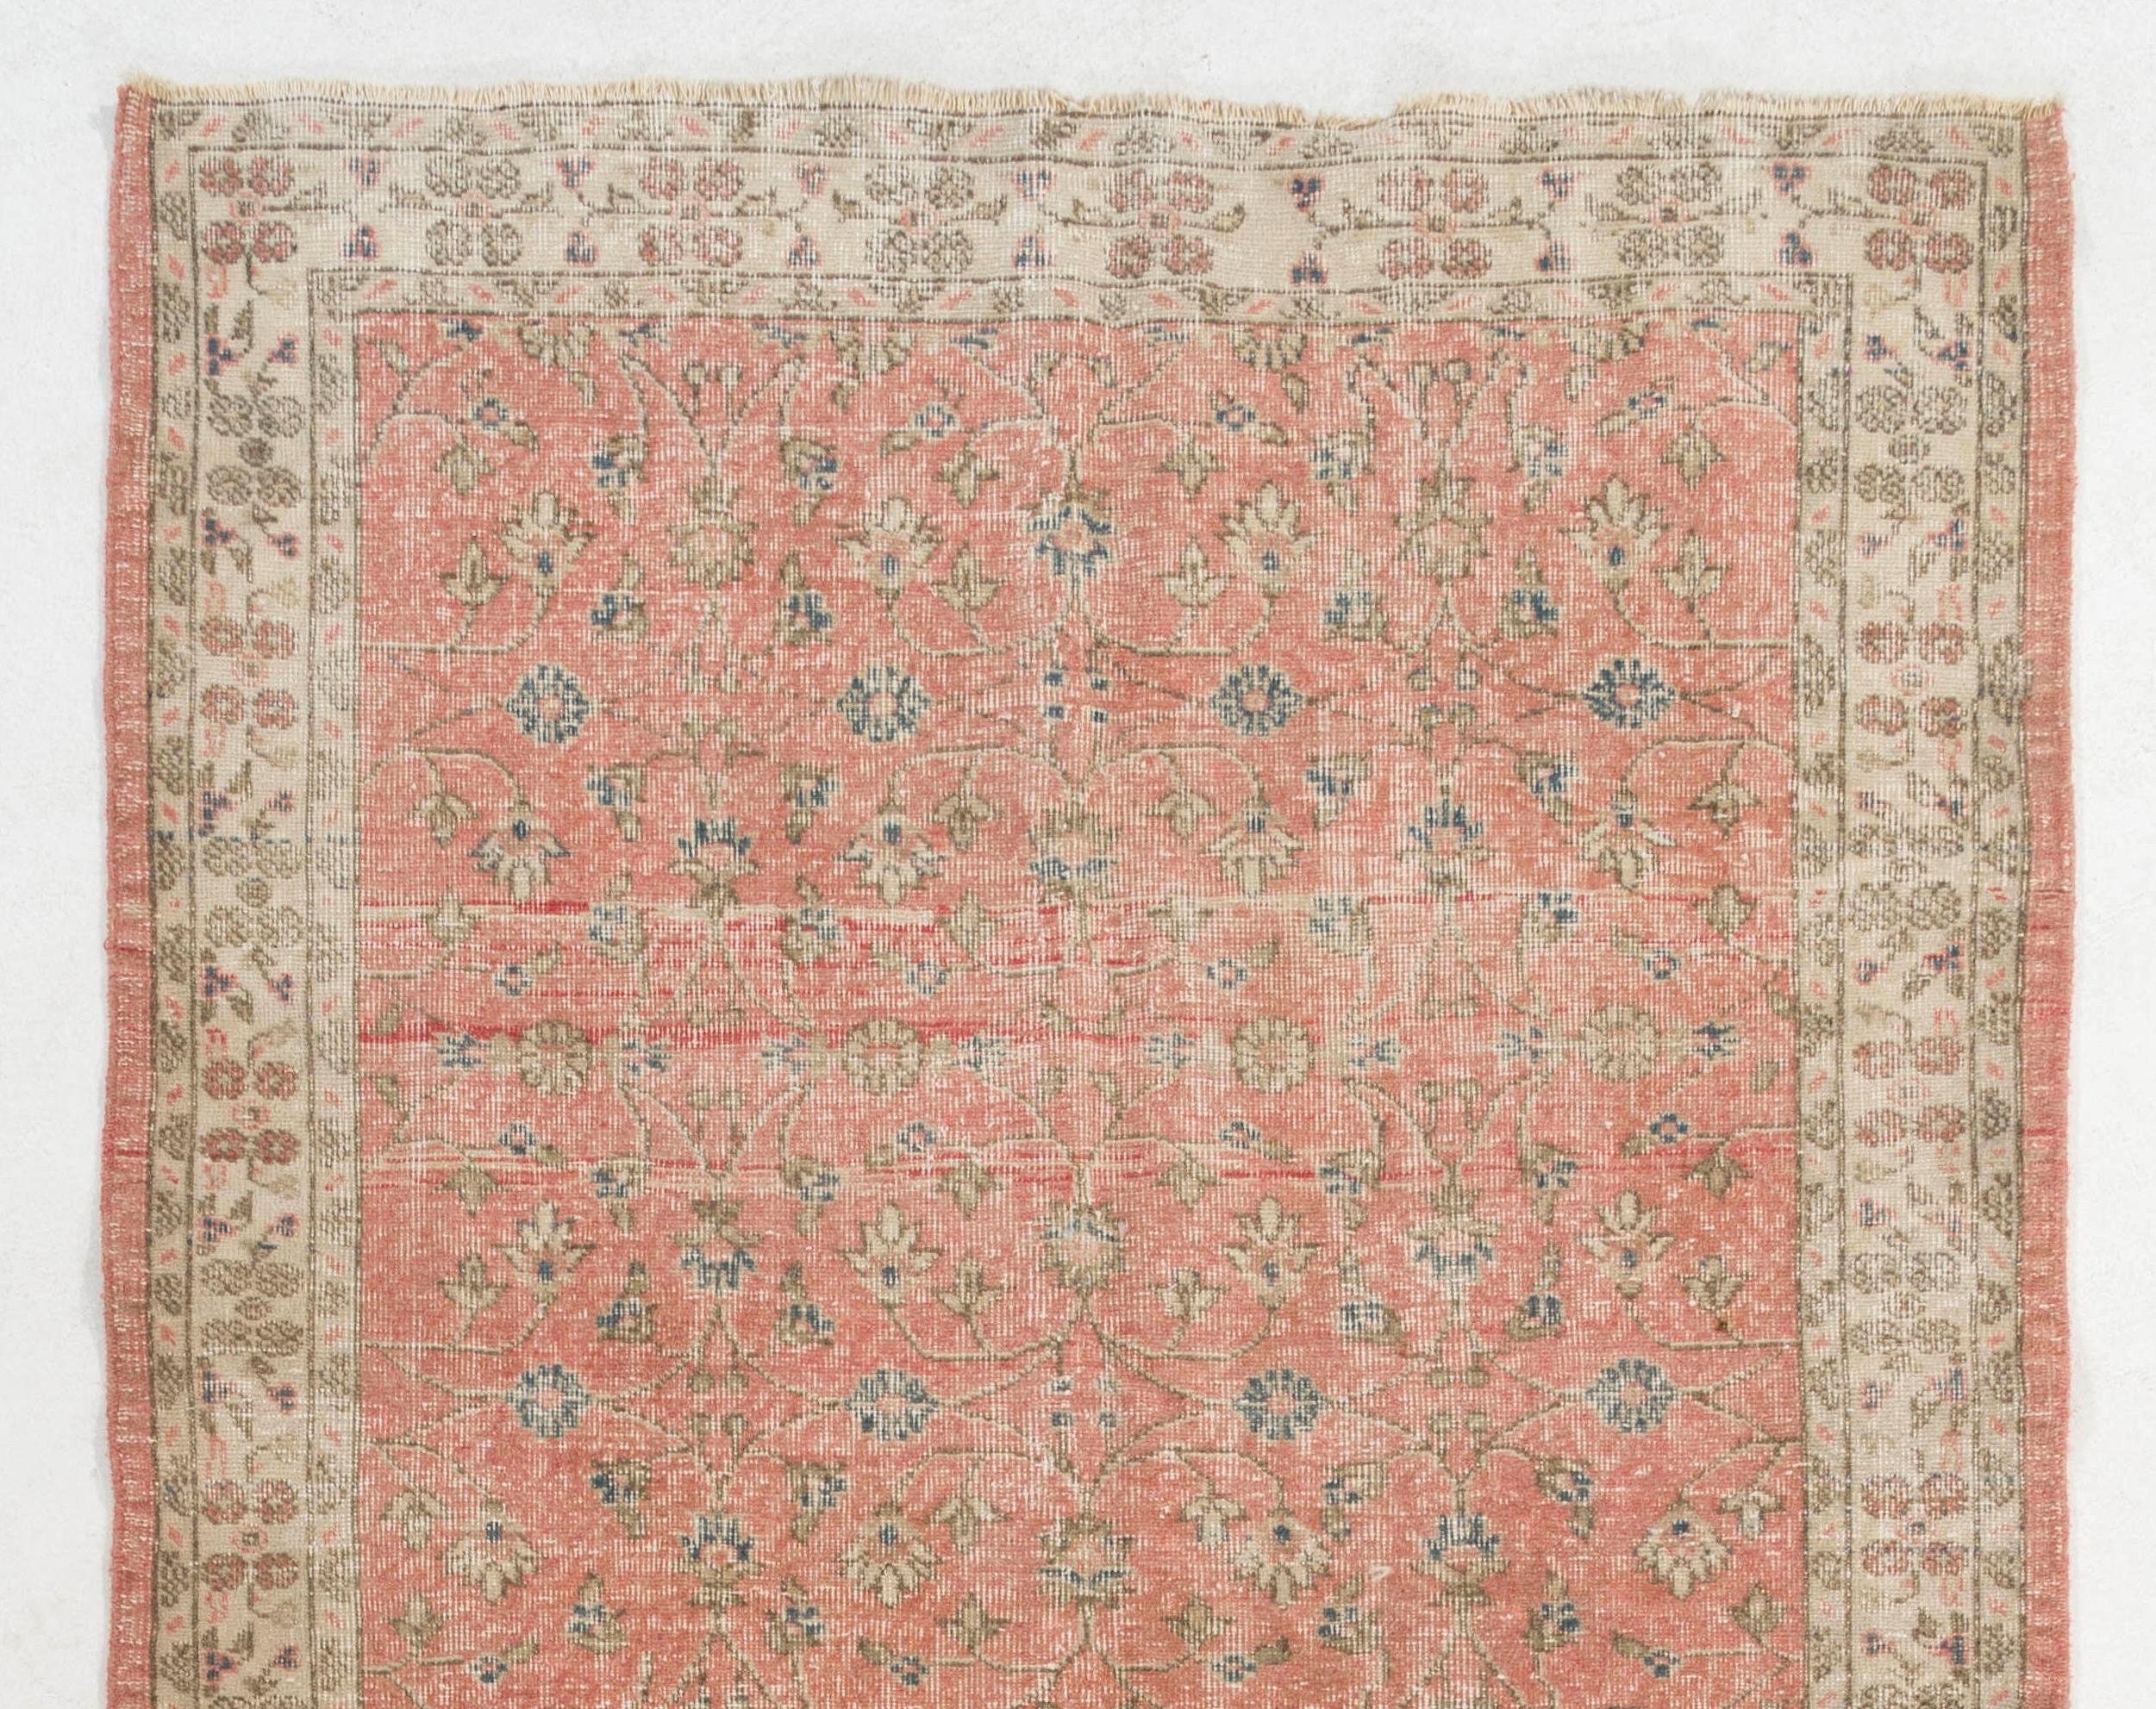 A vintage Turkish runner rug for hallway decor. It was hand-knotted in the 1960s and over-all floral design design. Sturdy and can be used on a high traffic area, suitable for both residential and commercial interiors. Measures: 5 x 12.7 ft.